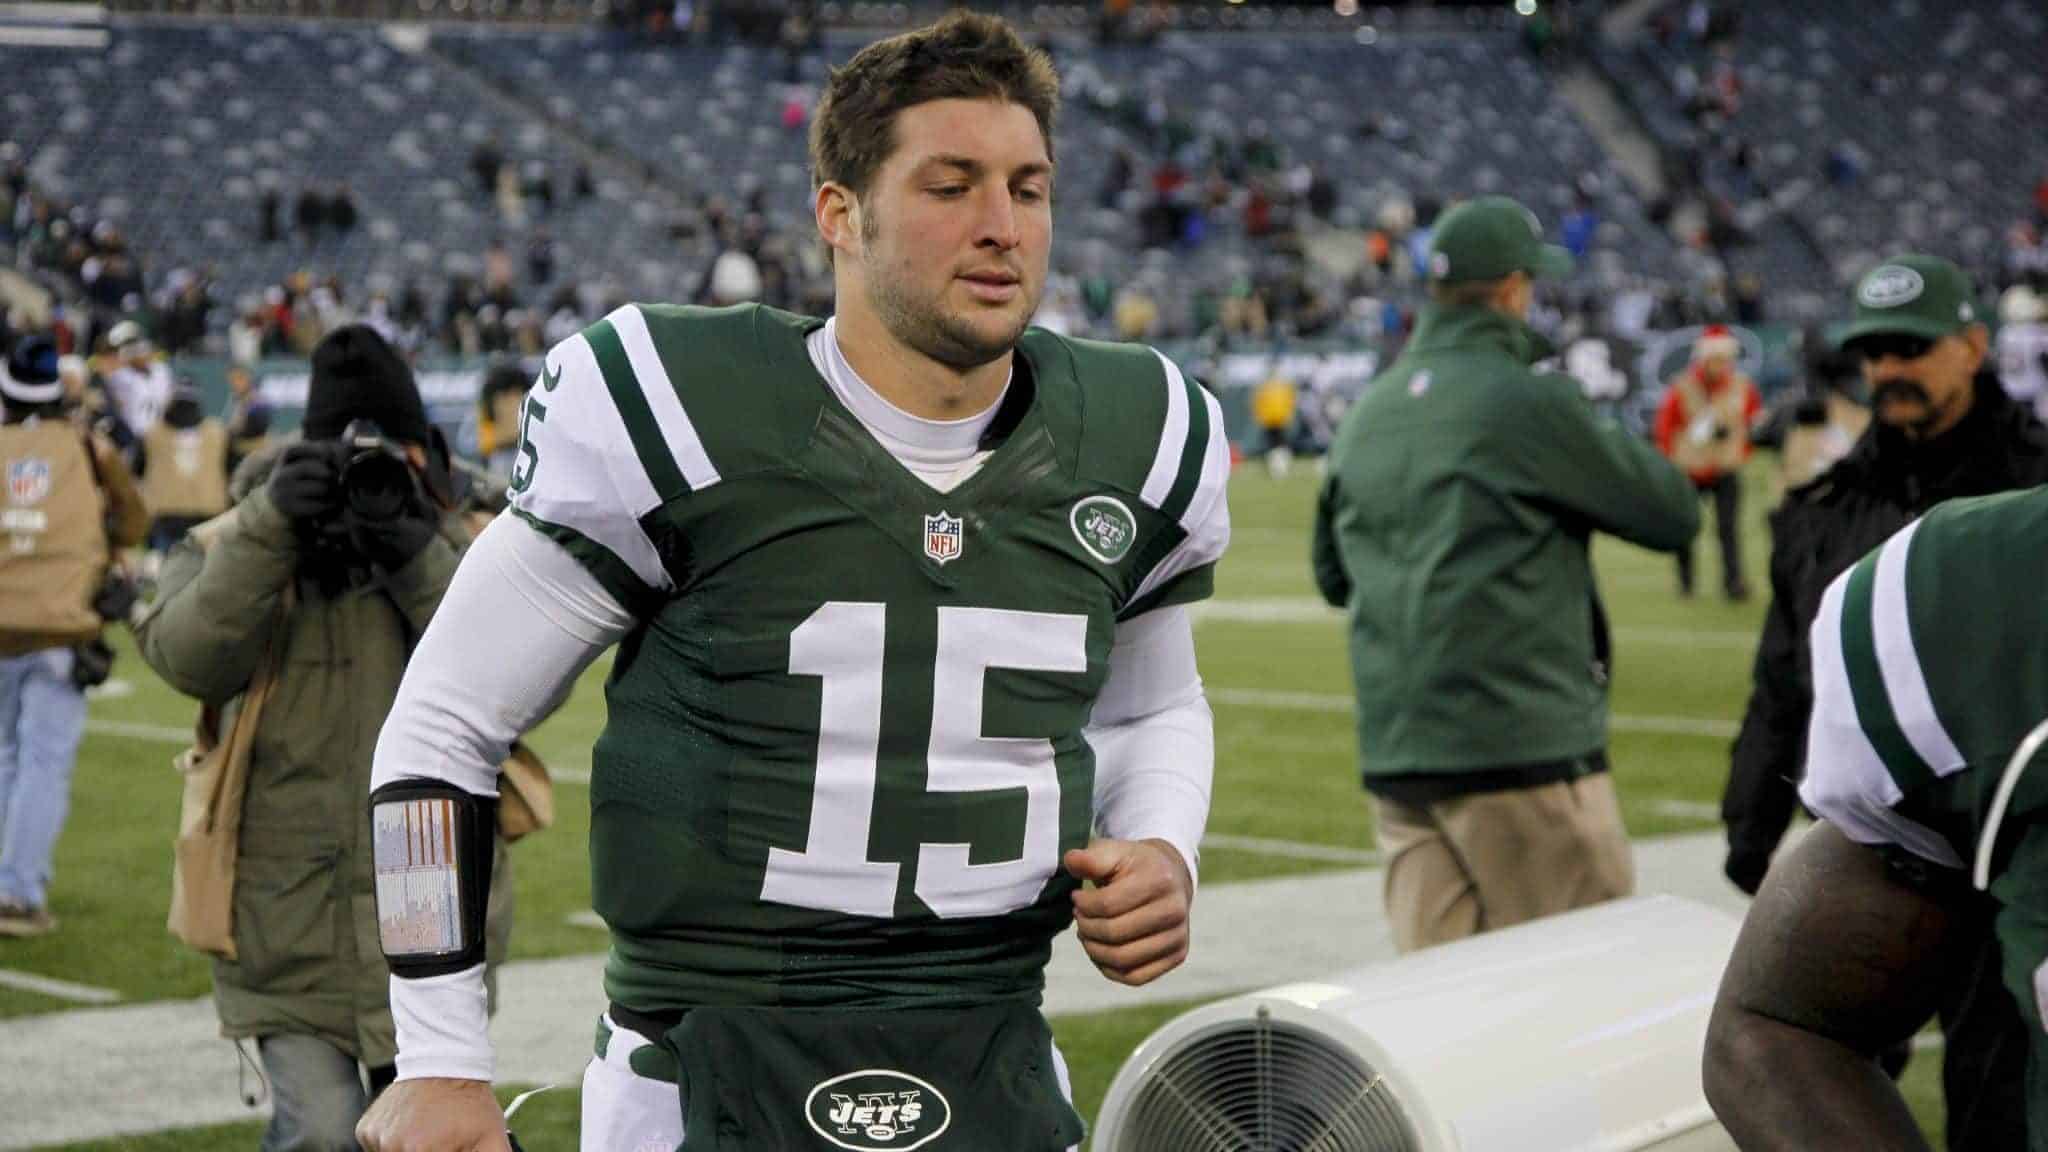 EAST RUTHERFORD, NJ - DECEMBER 23: Tim Tebow #15 of the New York Jets leaves the field after loss to San Diego Chargers at MetLife Stadium on December 23, 2012 in East Rutherford, New Jersey.